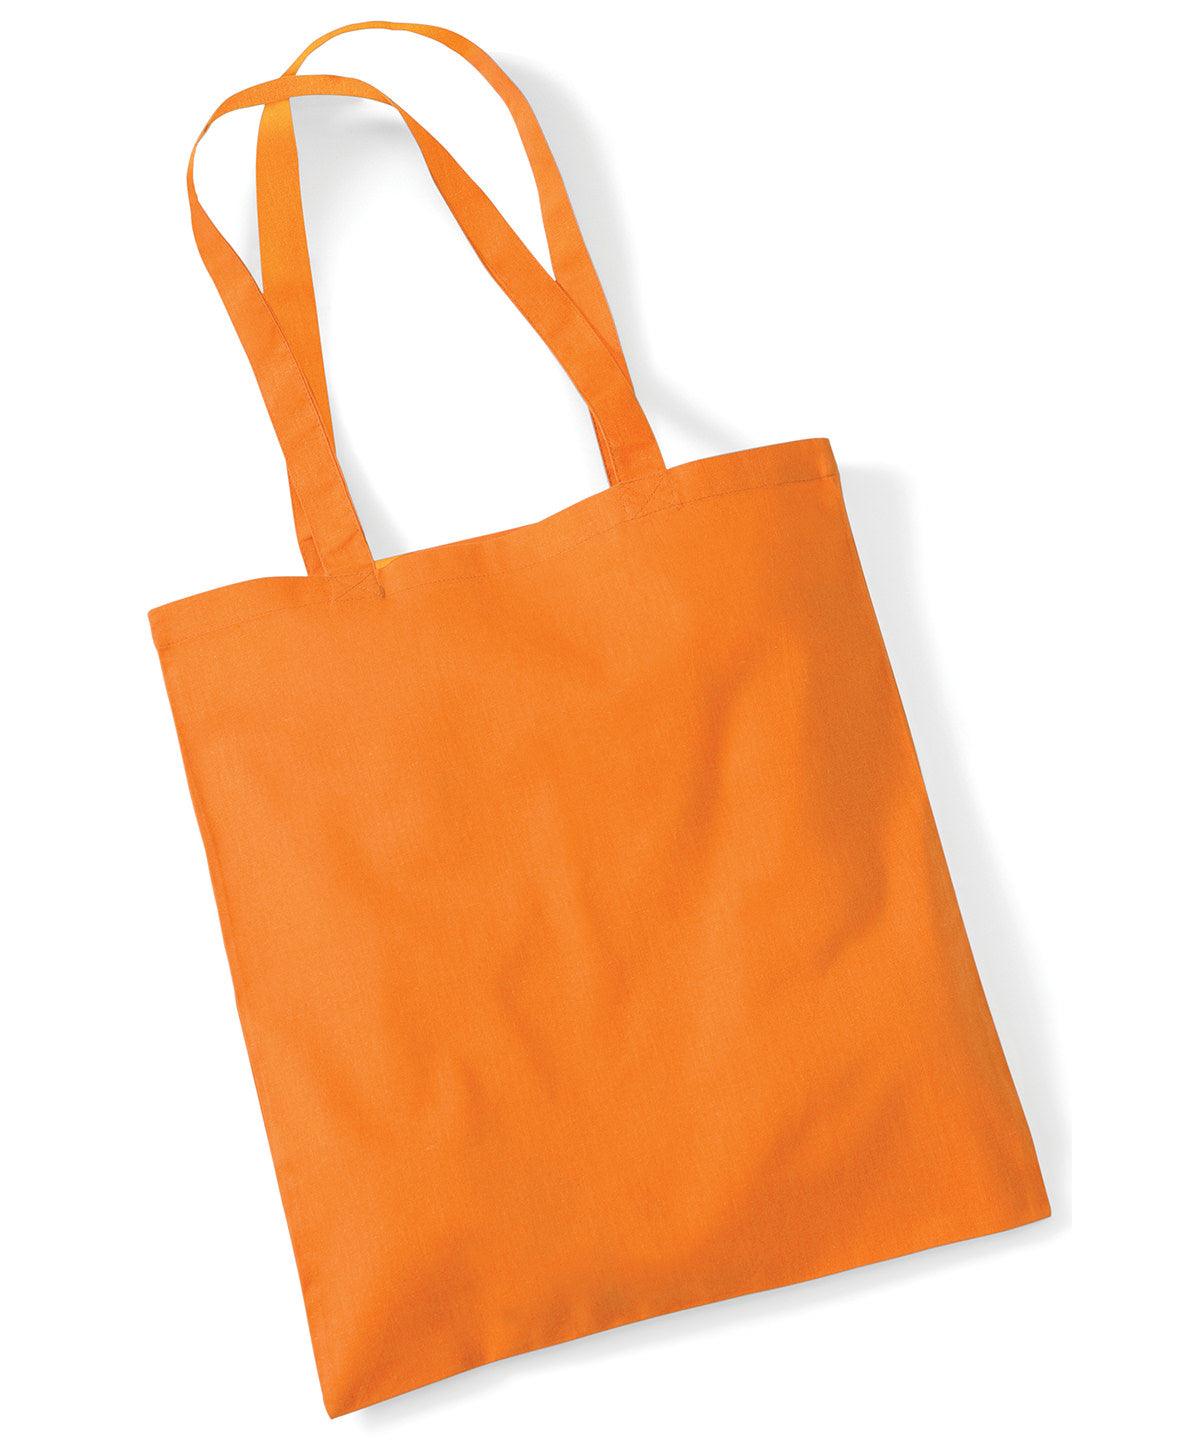 Orange - Bag for life - long handles Bags Westford Mill Bags & Luggage, Crafting, Must Haves, Rebrandable Schoolwear Centres